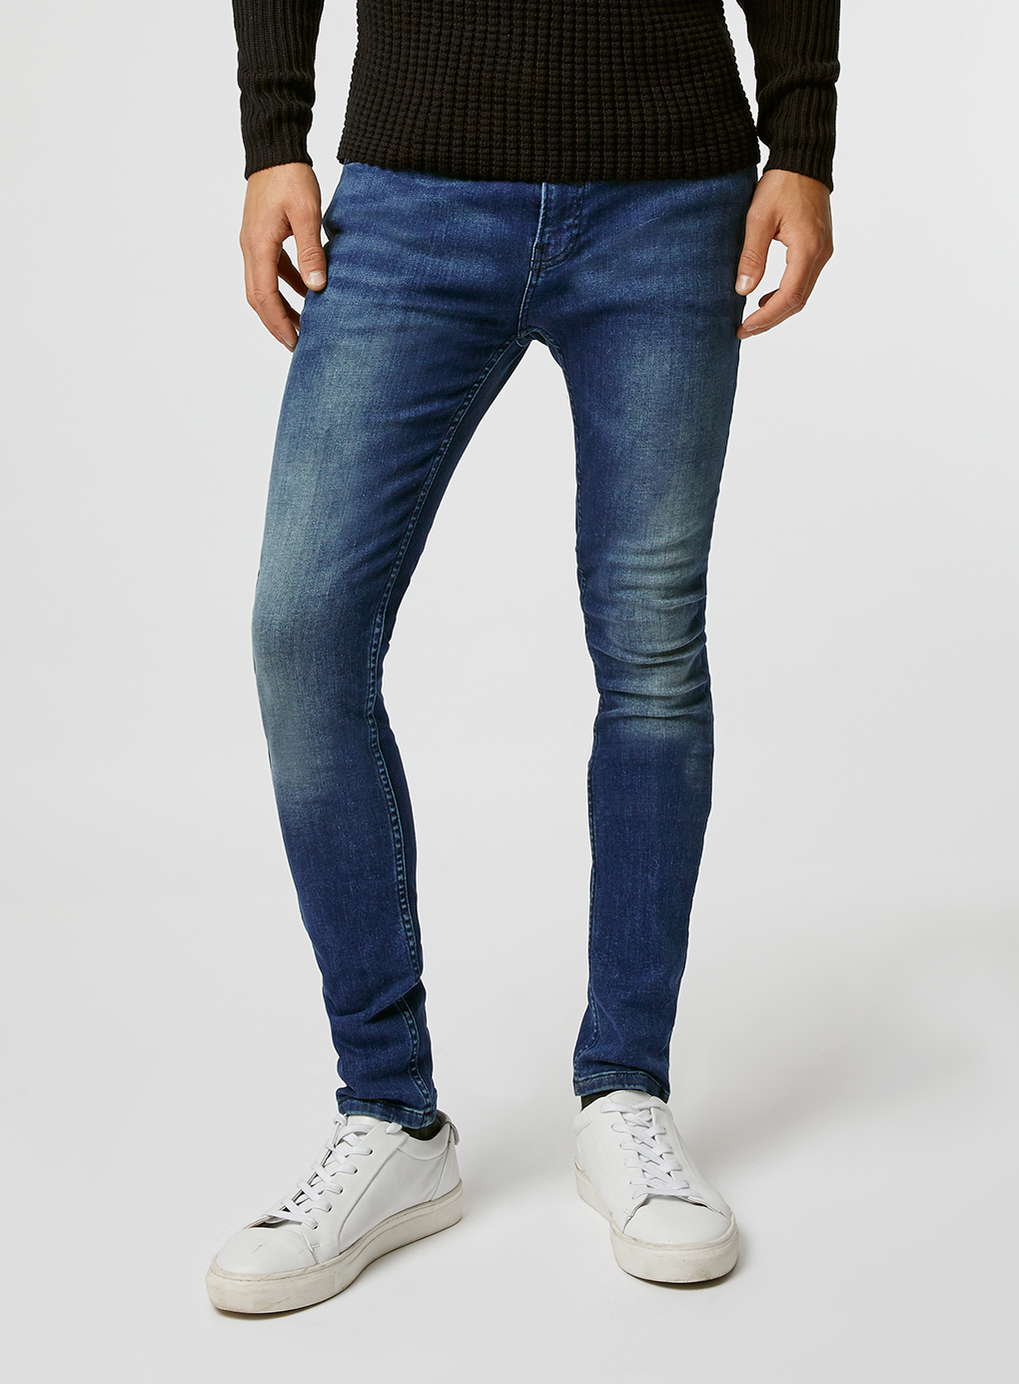 solide Diakritisch loyaliteit 10 Ultimate Super Extreme Skinny Jeans For Men - THE JEANS BLOG